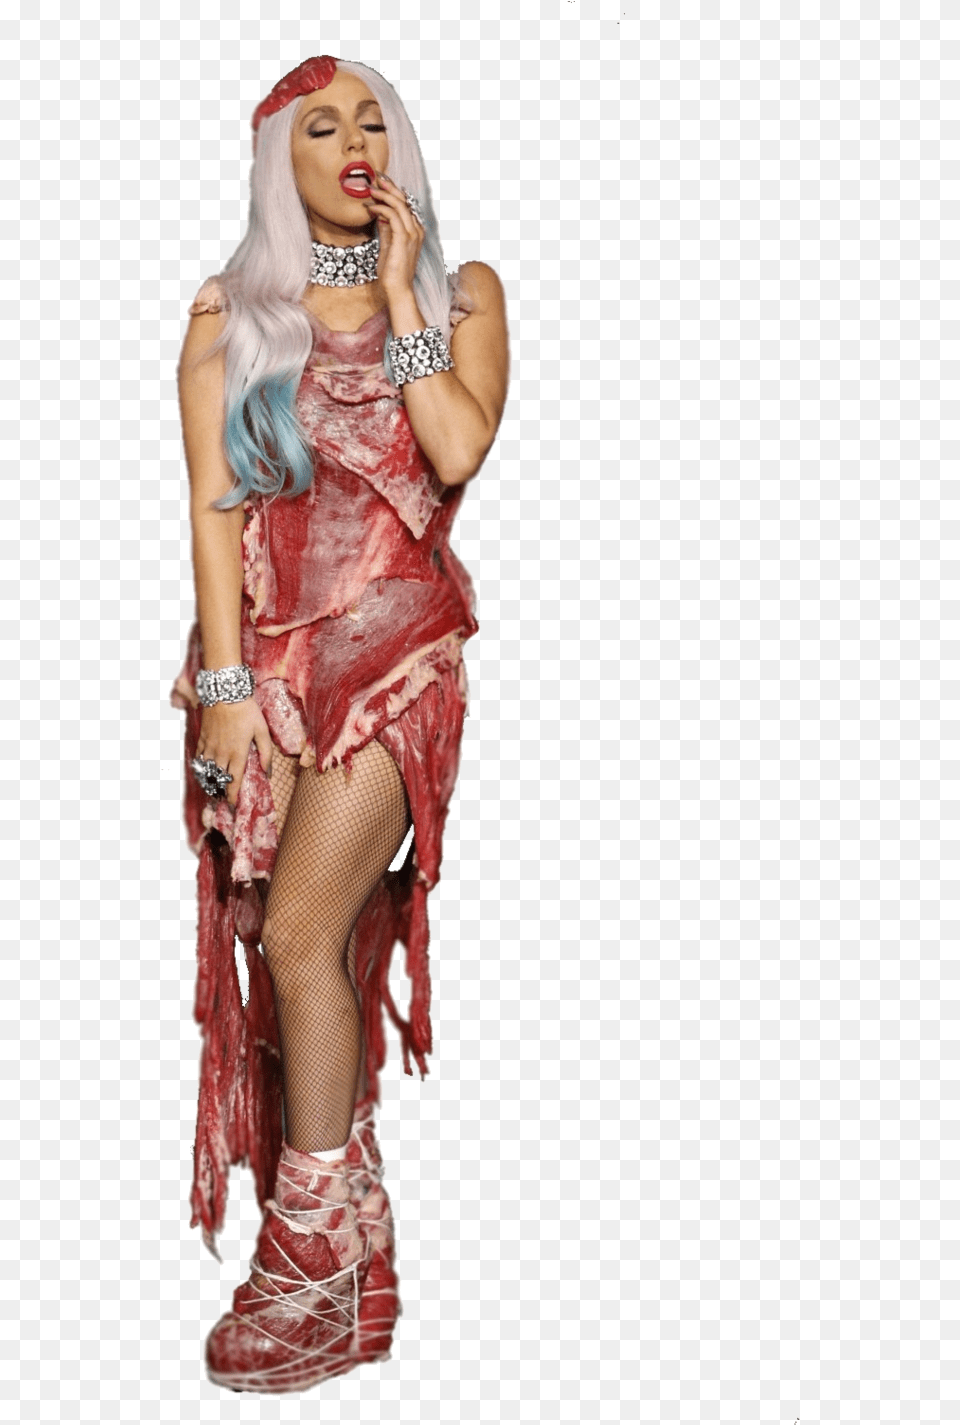 Lady Gaga Meat Dress By Heavyfallentears D4714bq Lady Gaga Meat Dress, Person, Clothing, Costume, Woman Png Image